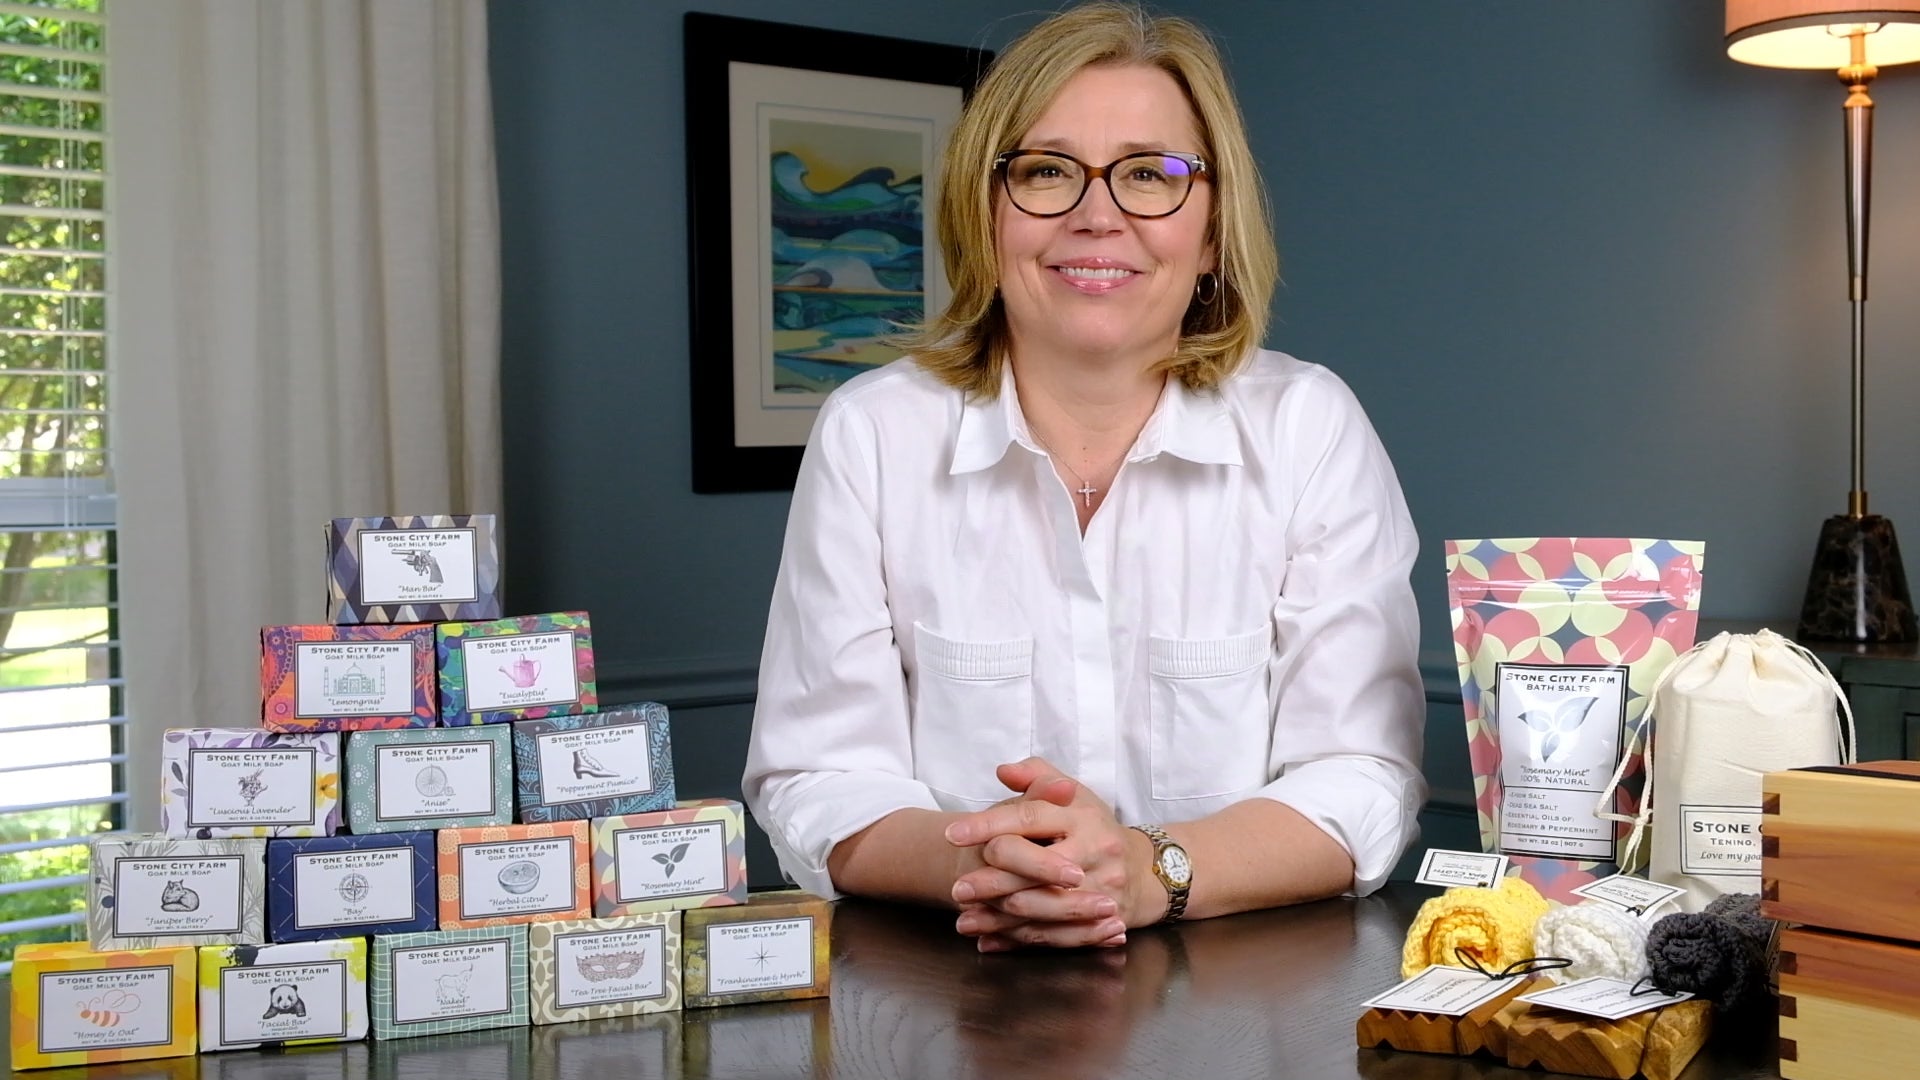 Listen to what Kim from Dallas has to say about our soap!